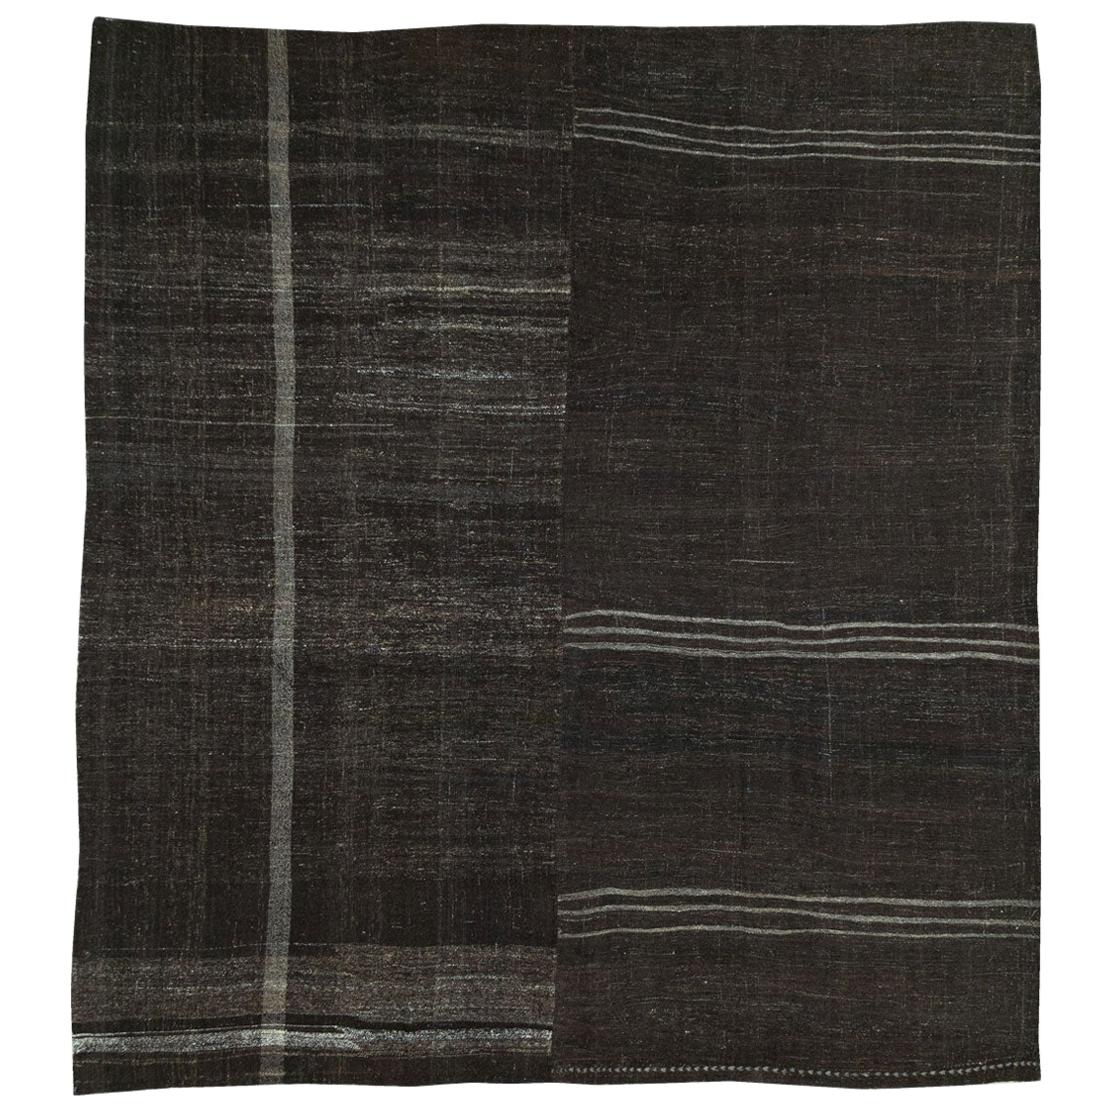 Mid-20th Century Turkish Tribal Kilim Square Room Size Carpet in Charcoal Black For Sale